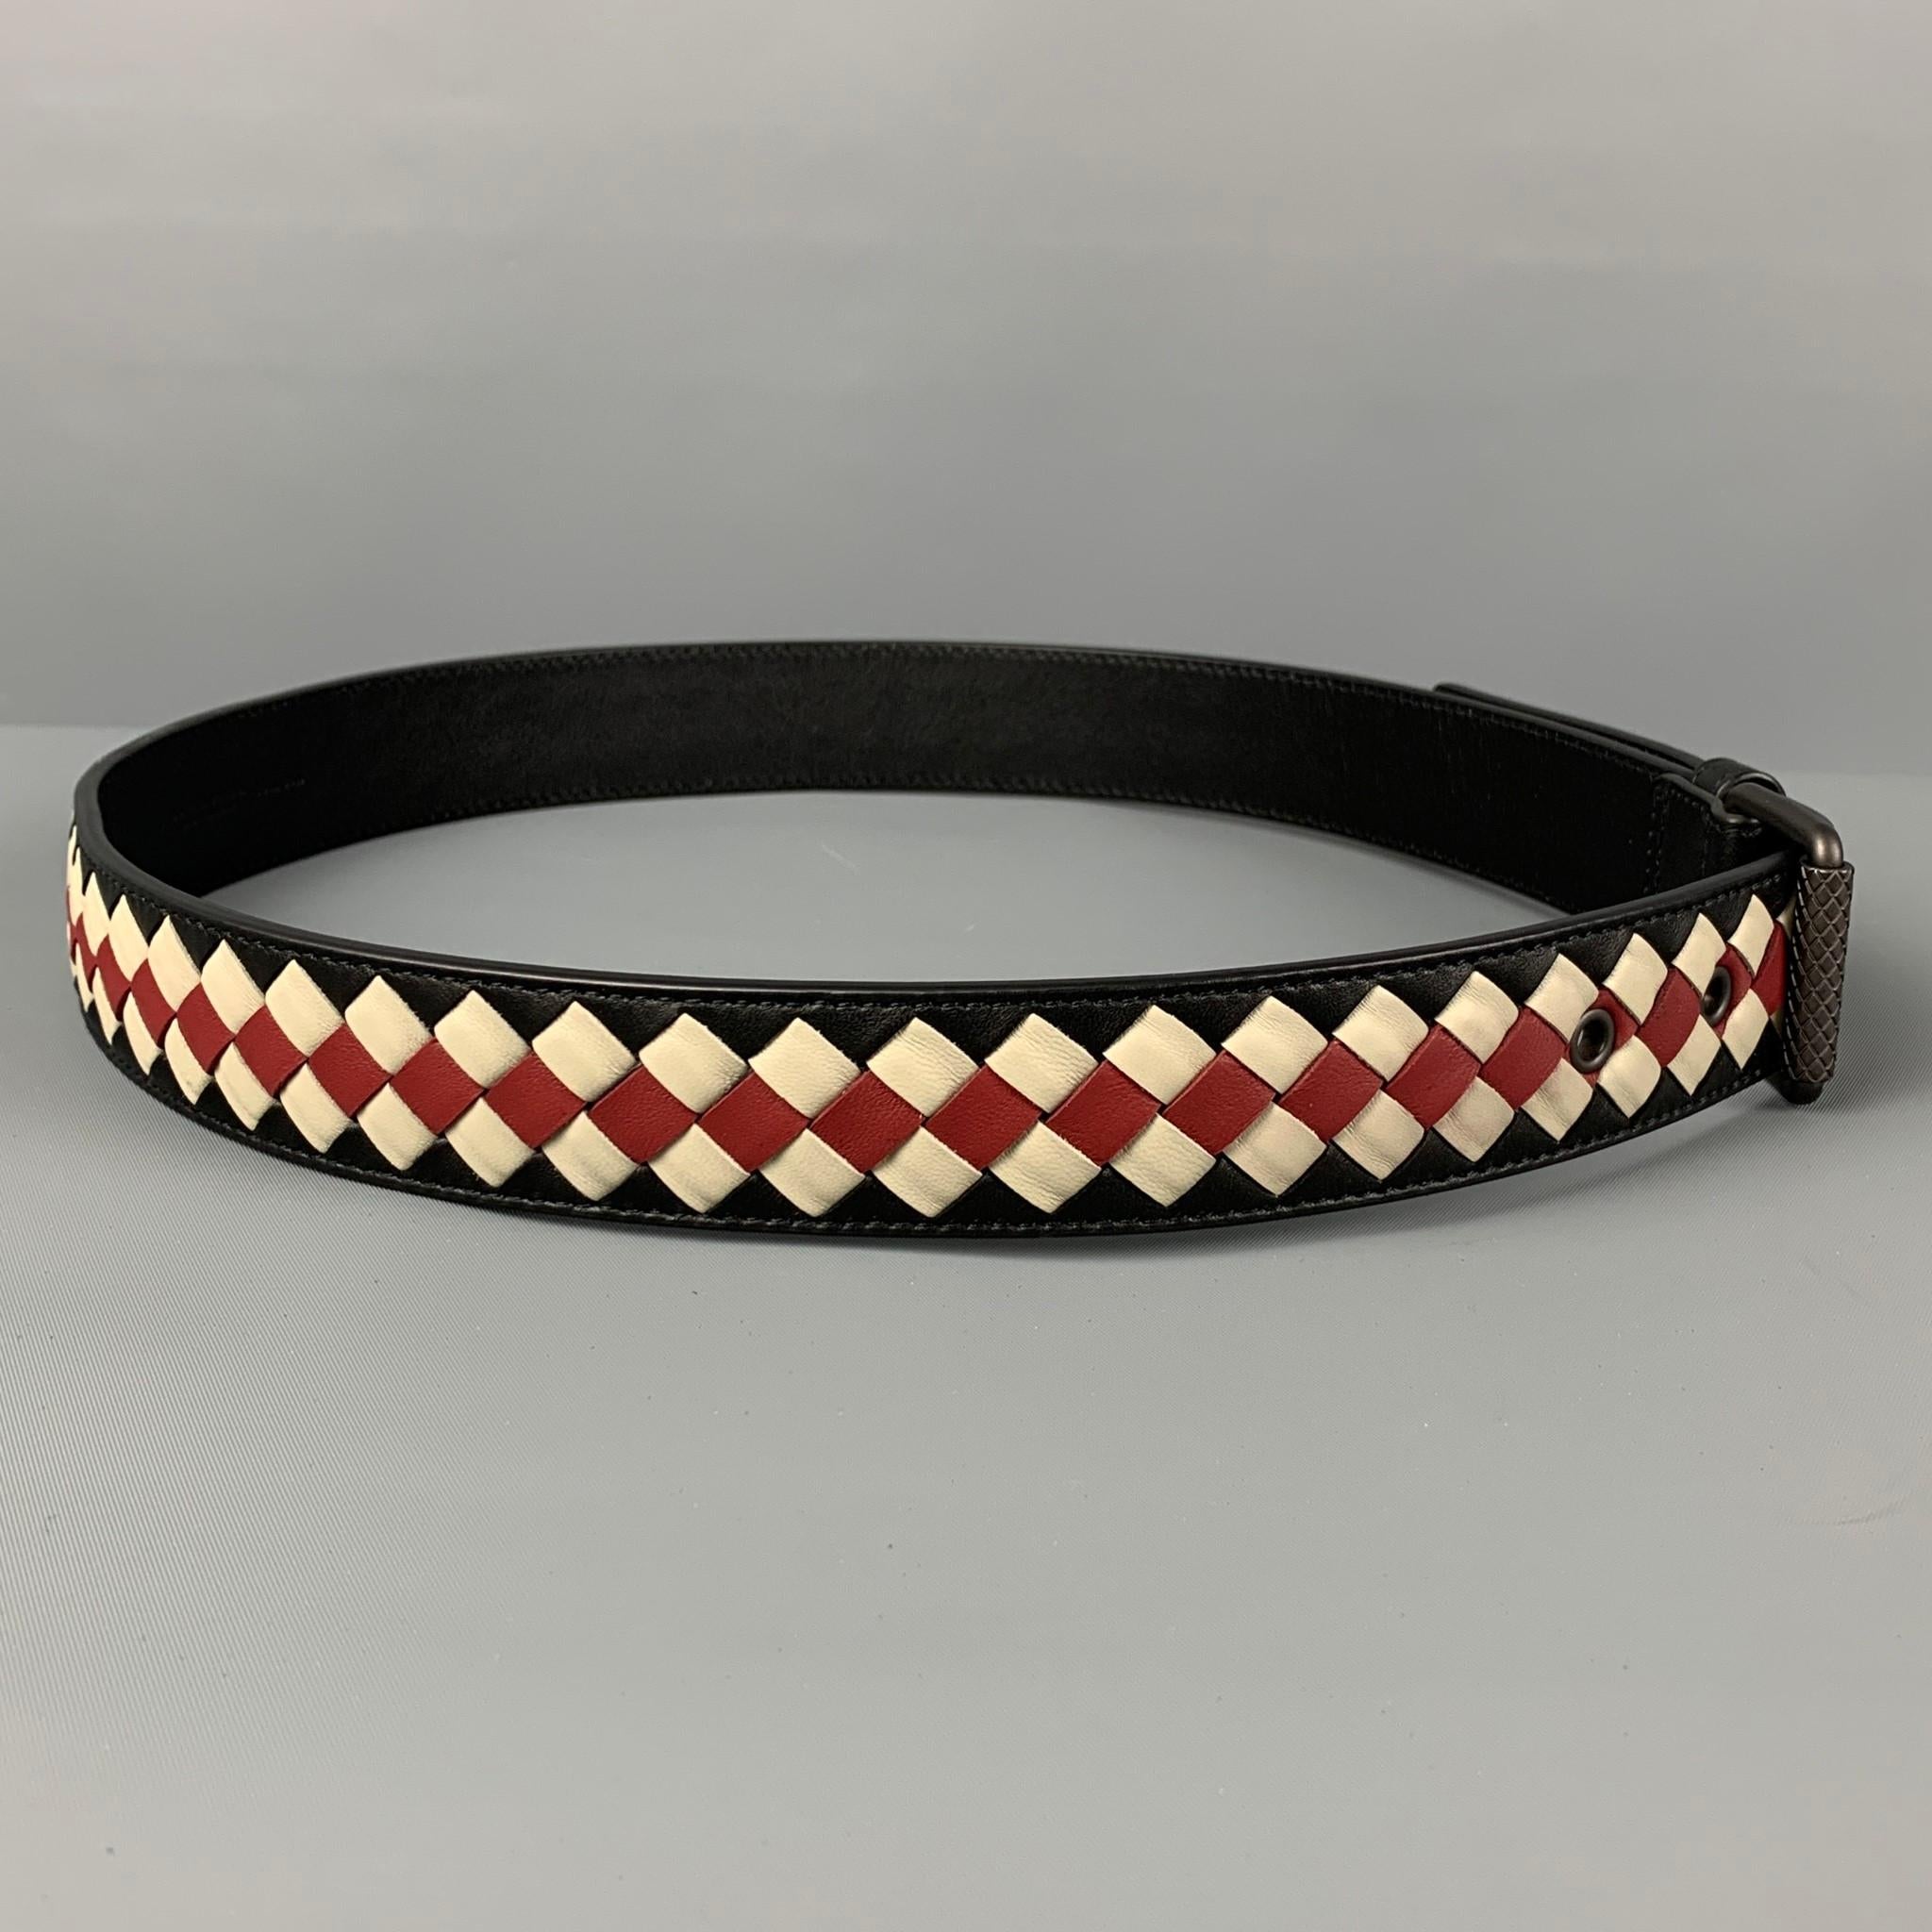 BOTTEGA VENETA belt comes in a black & red woven leather featuring a buckle closure. Made in Italy. 

Very Good Pre-Owned Condition. Minor wear.
Marked: 85/34
Original Retail Price: $790.00

Length: 38.5 in.
Width: 1.25 in.
Fits: 30 in. - 35